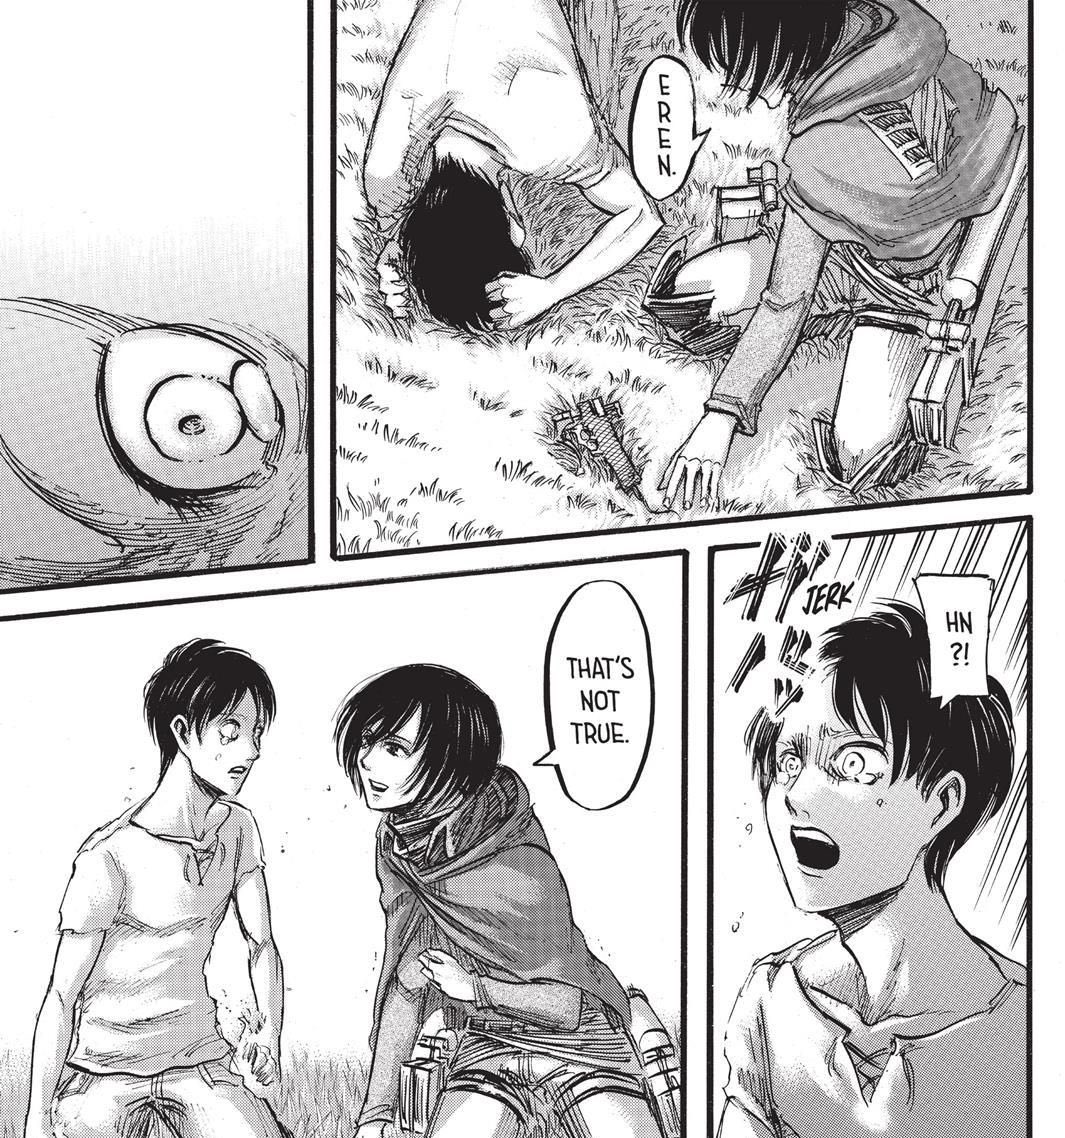 his friends who would never have wanted it.Eren will be in this story a person loyal to the end of his promises, which he will have respected. He never asked to be admired. Throughout work, he has always considered himself weak,even if according to others,this was not the case